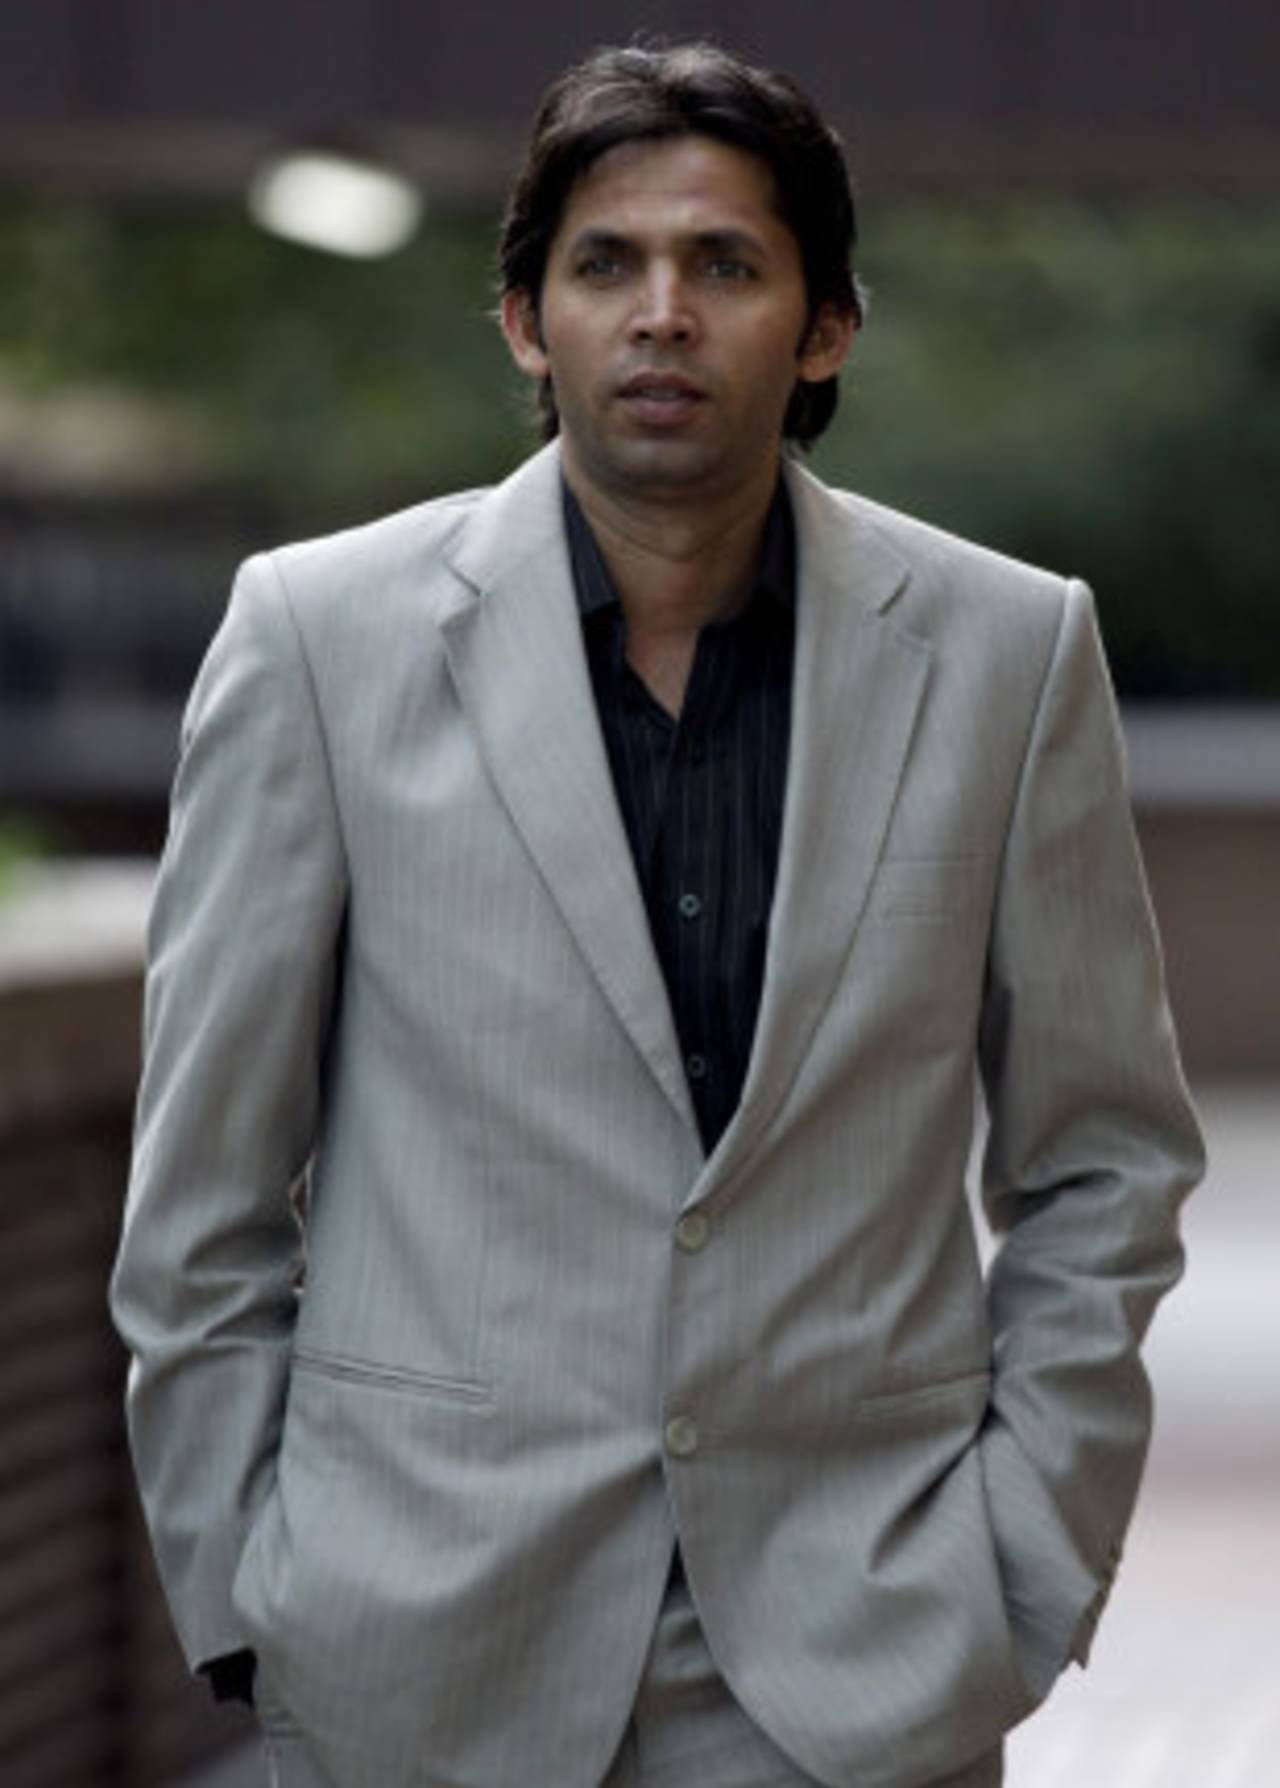 Mohammad Asif at the end of the day's proceedings in the spot-fixing trial, London, October 11, 2011